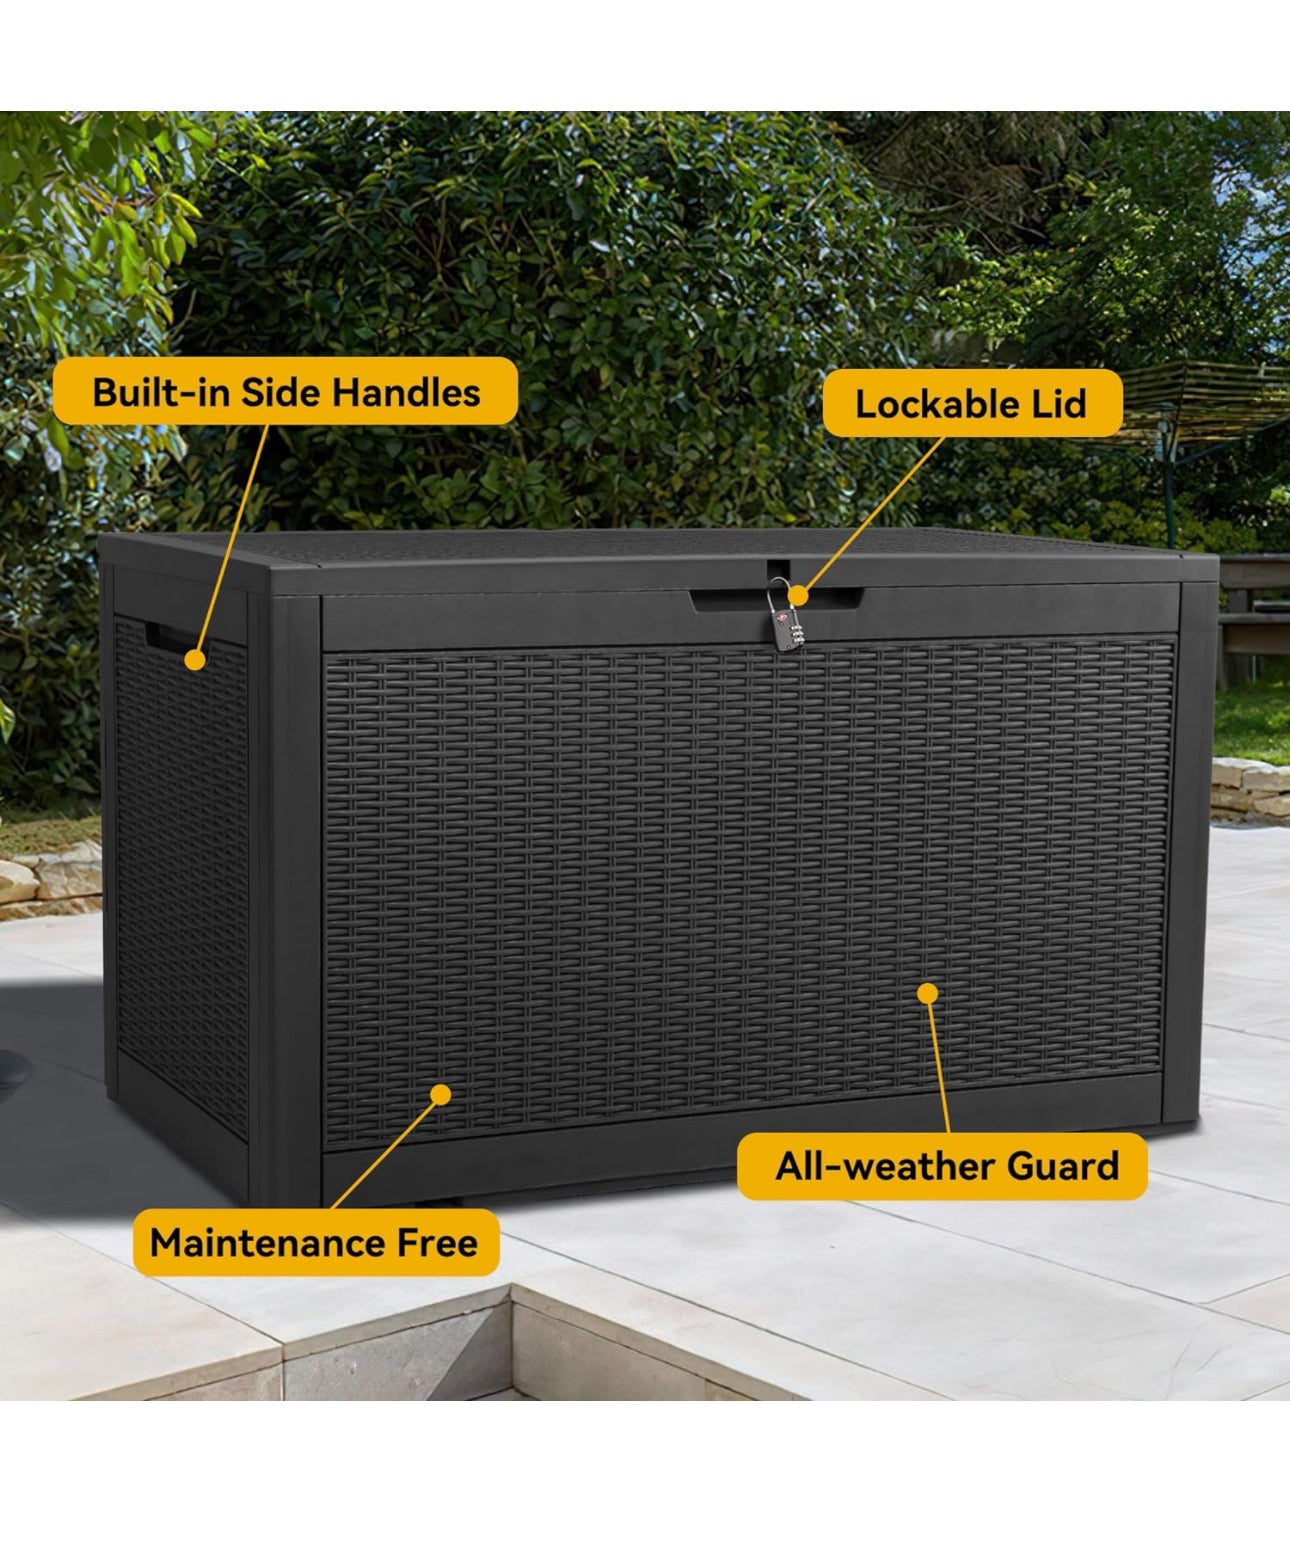 Outdoor storage box 100 gallon waterproof Free shipping in the US  or local pickup